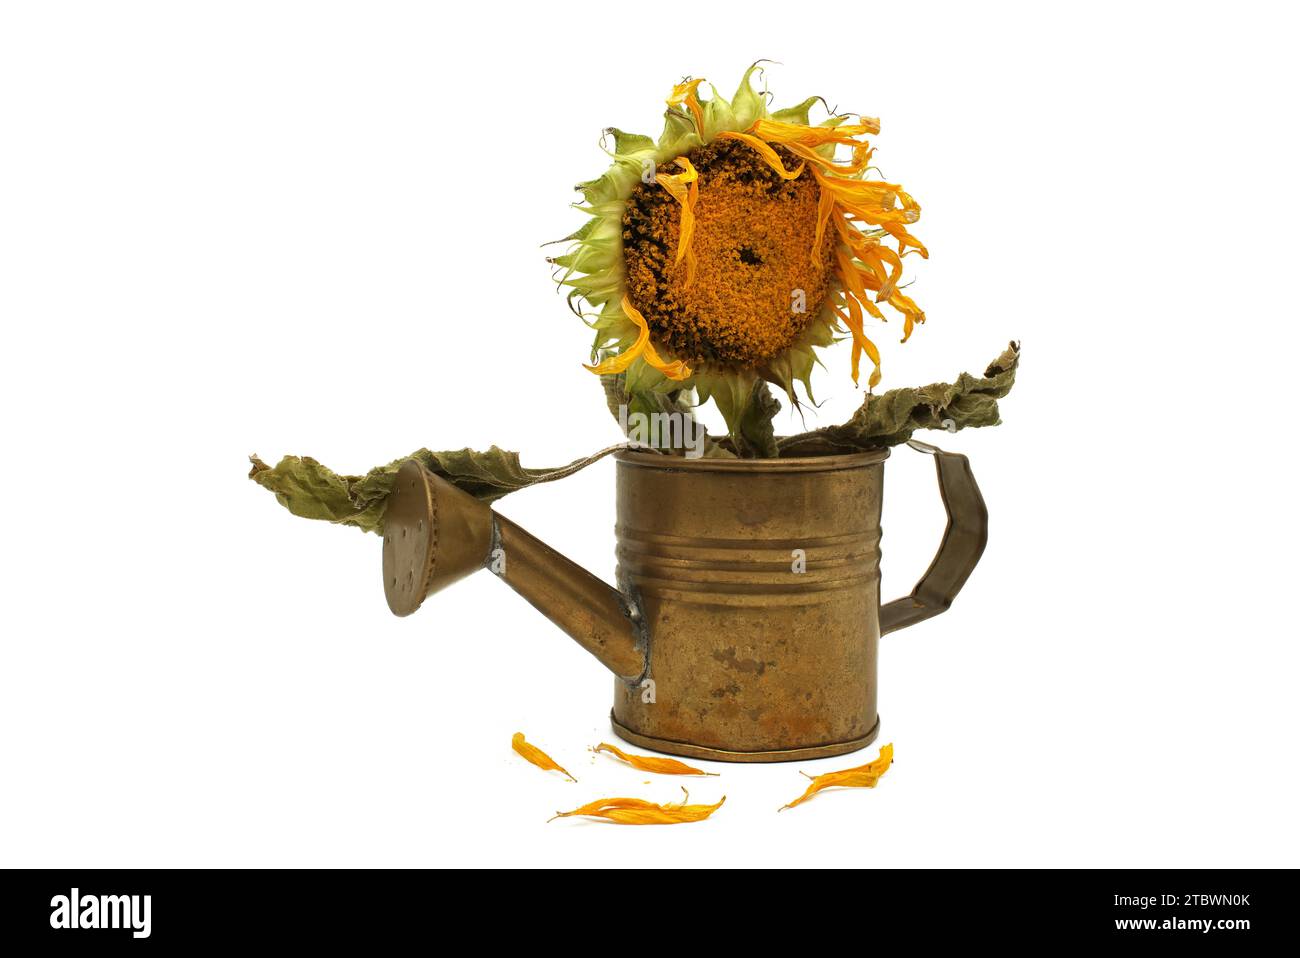 Rustic still life with withering sunflower in a watering can showing the oil-rich seed formation and a few fallen yellow petals in the foreground Stock Photo